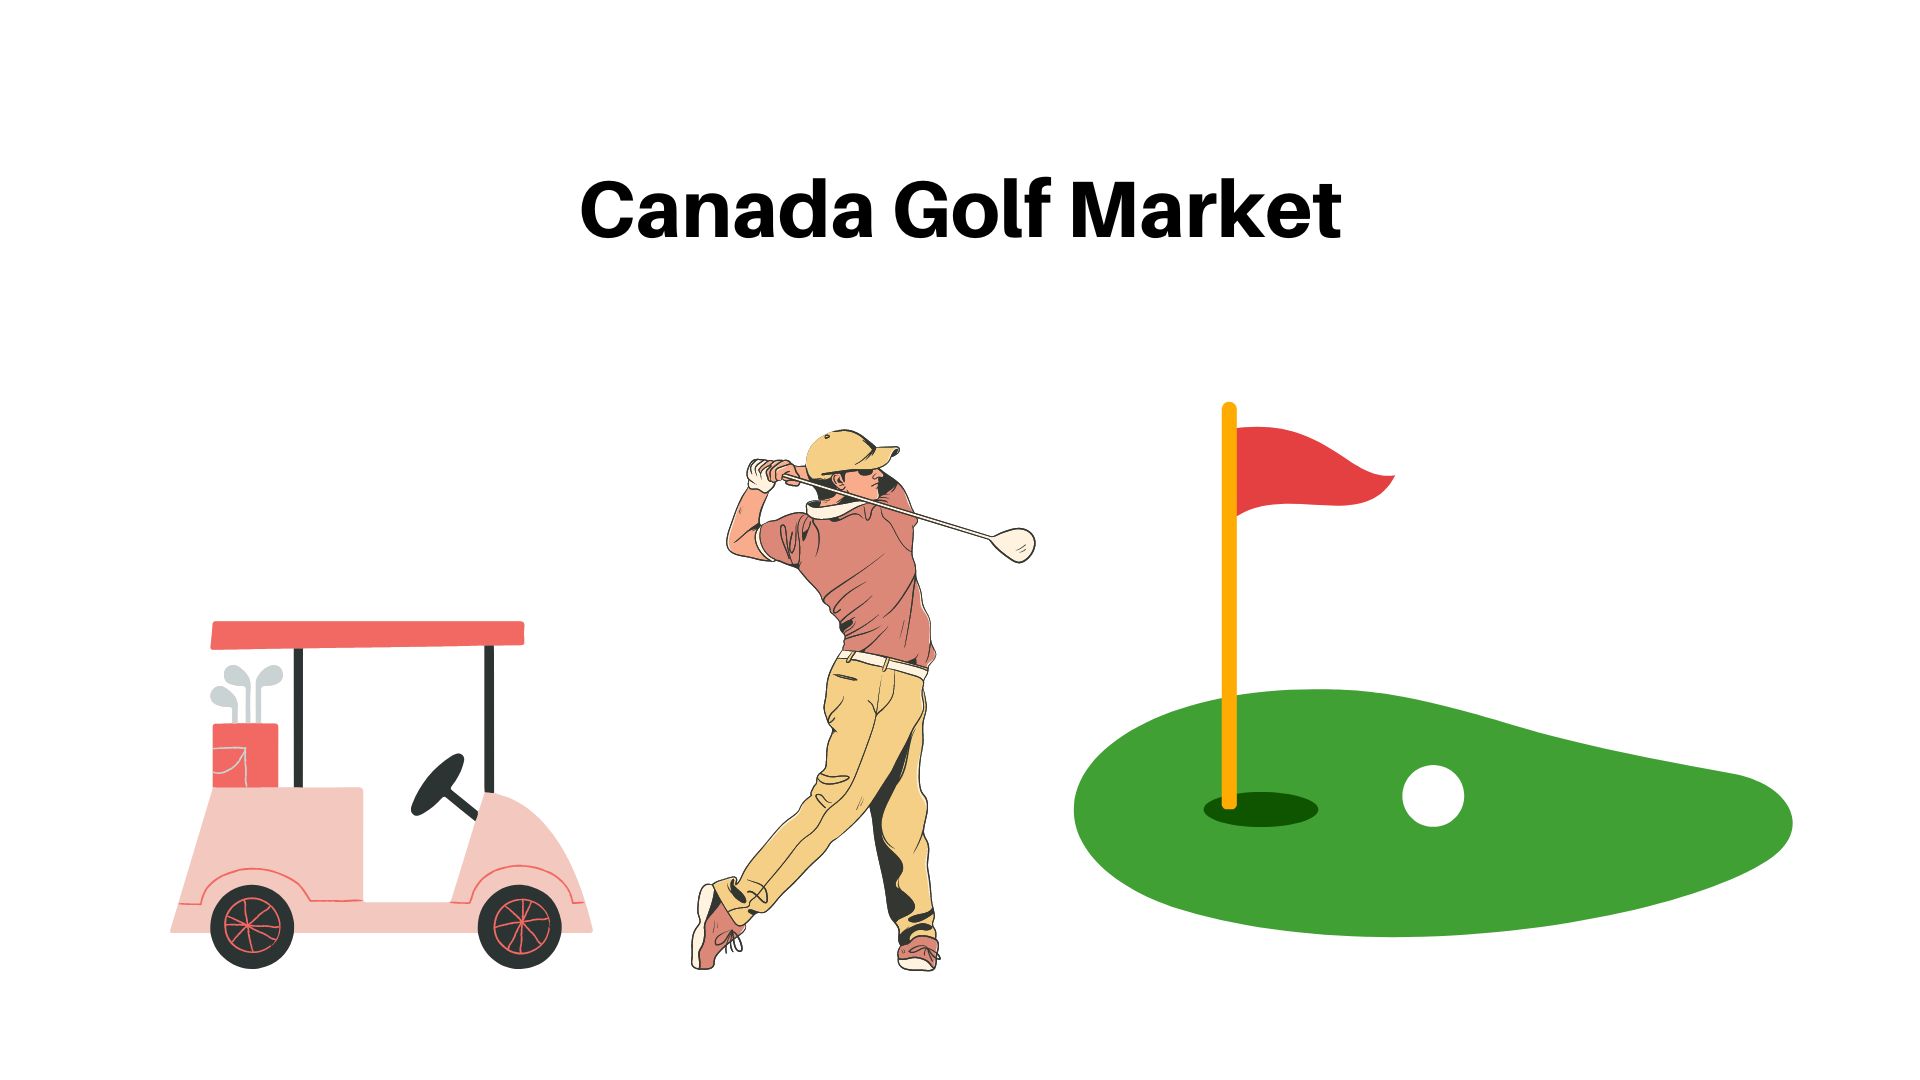 Canada Golf Market Sales to Top USD 191.46 million in Revenues by 2033